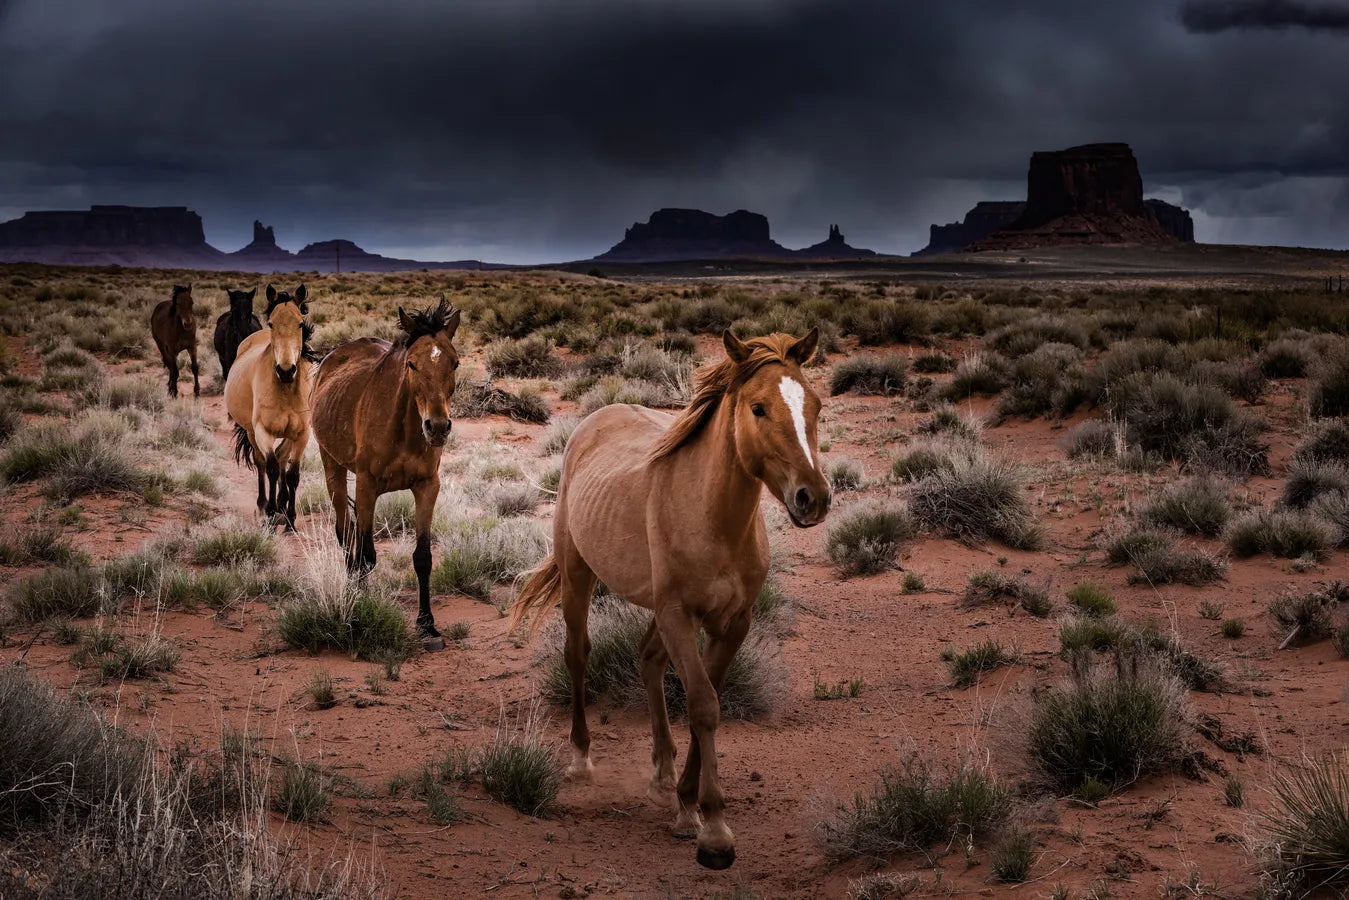 Horses in the valley wallpaper